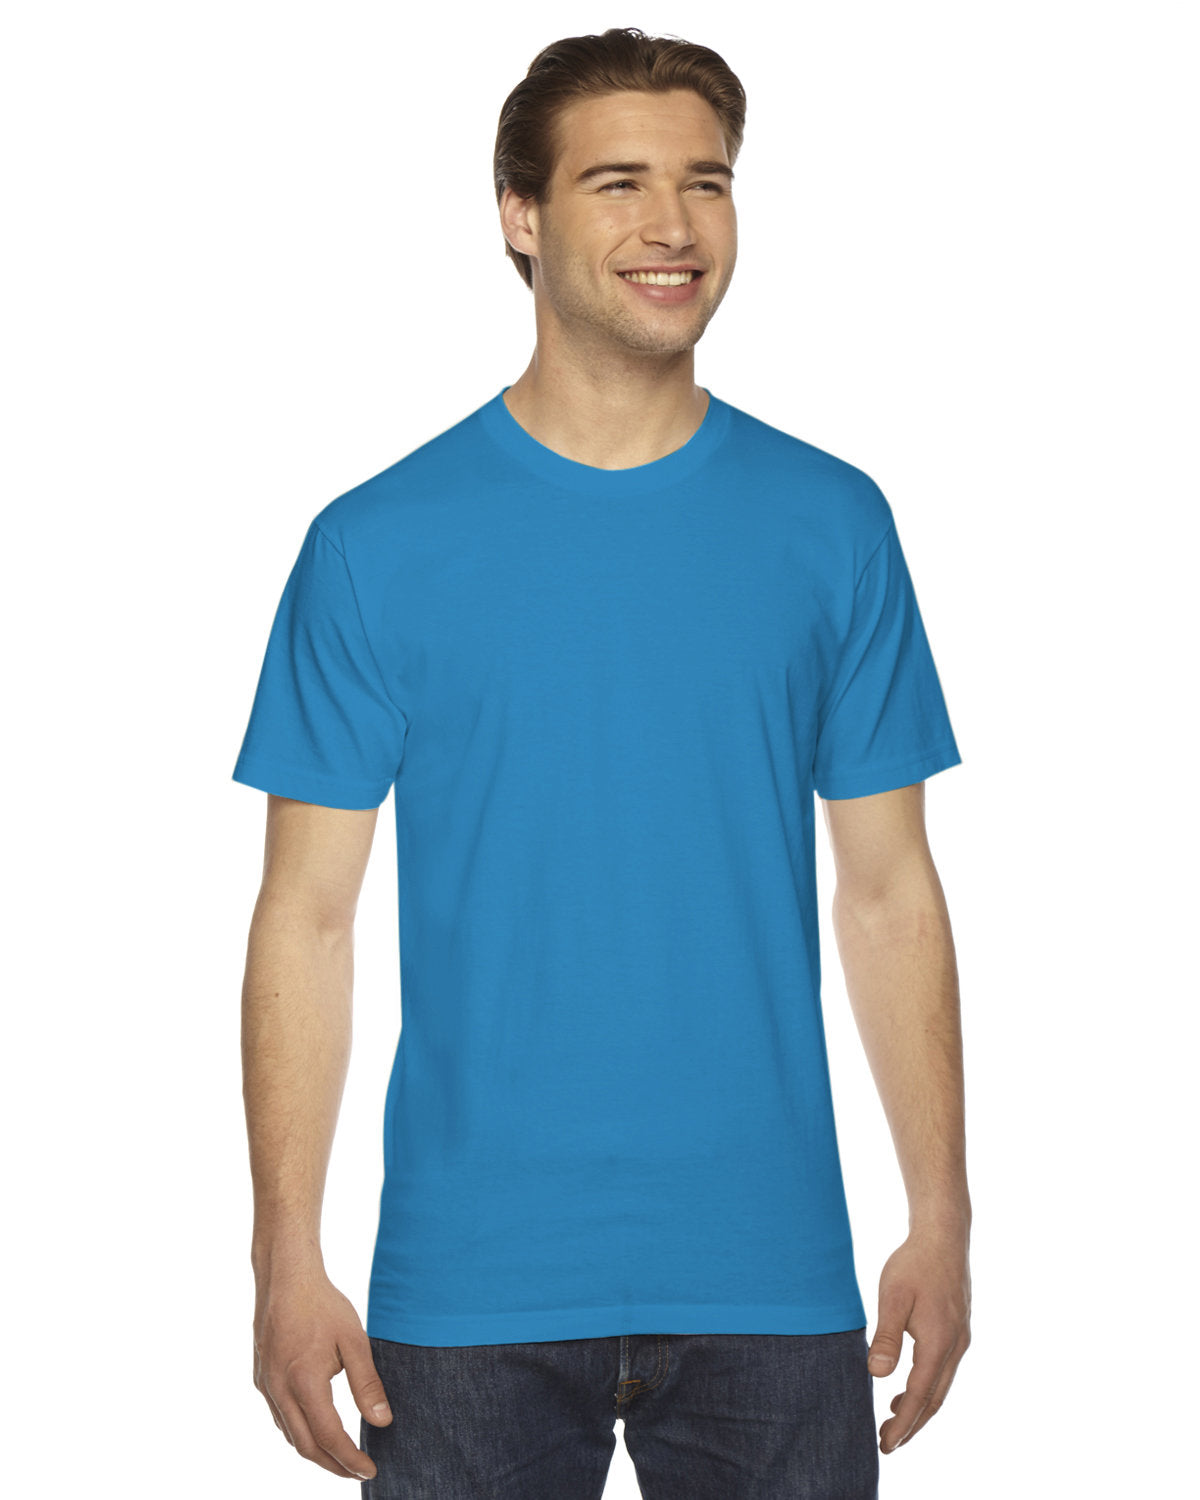 Teal t-shirt, front view.